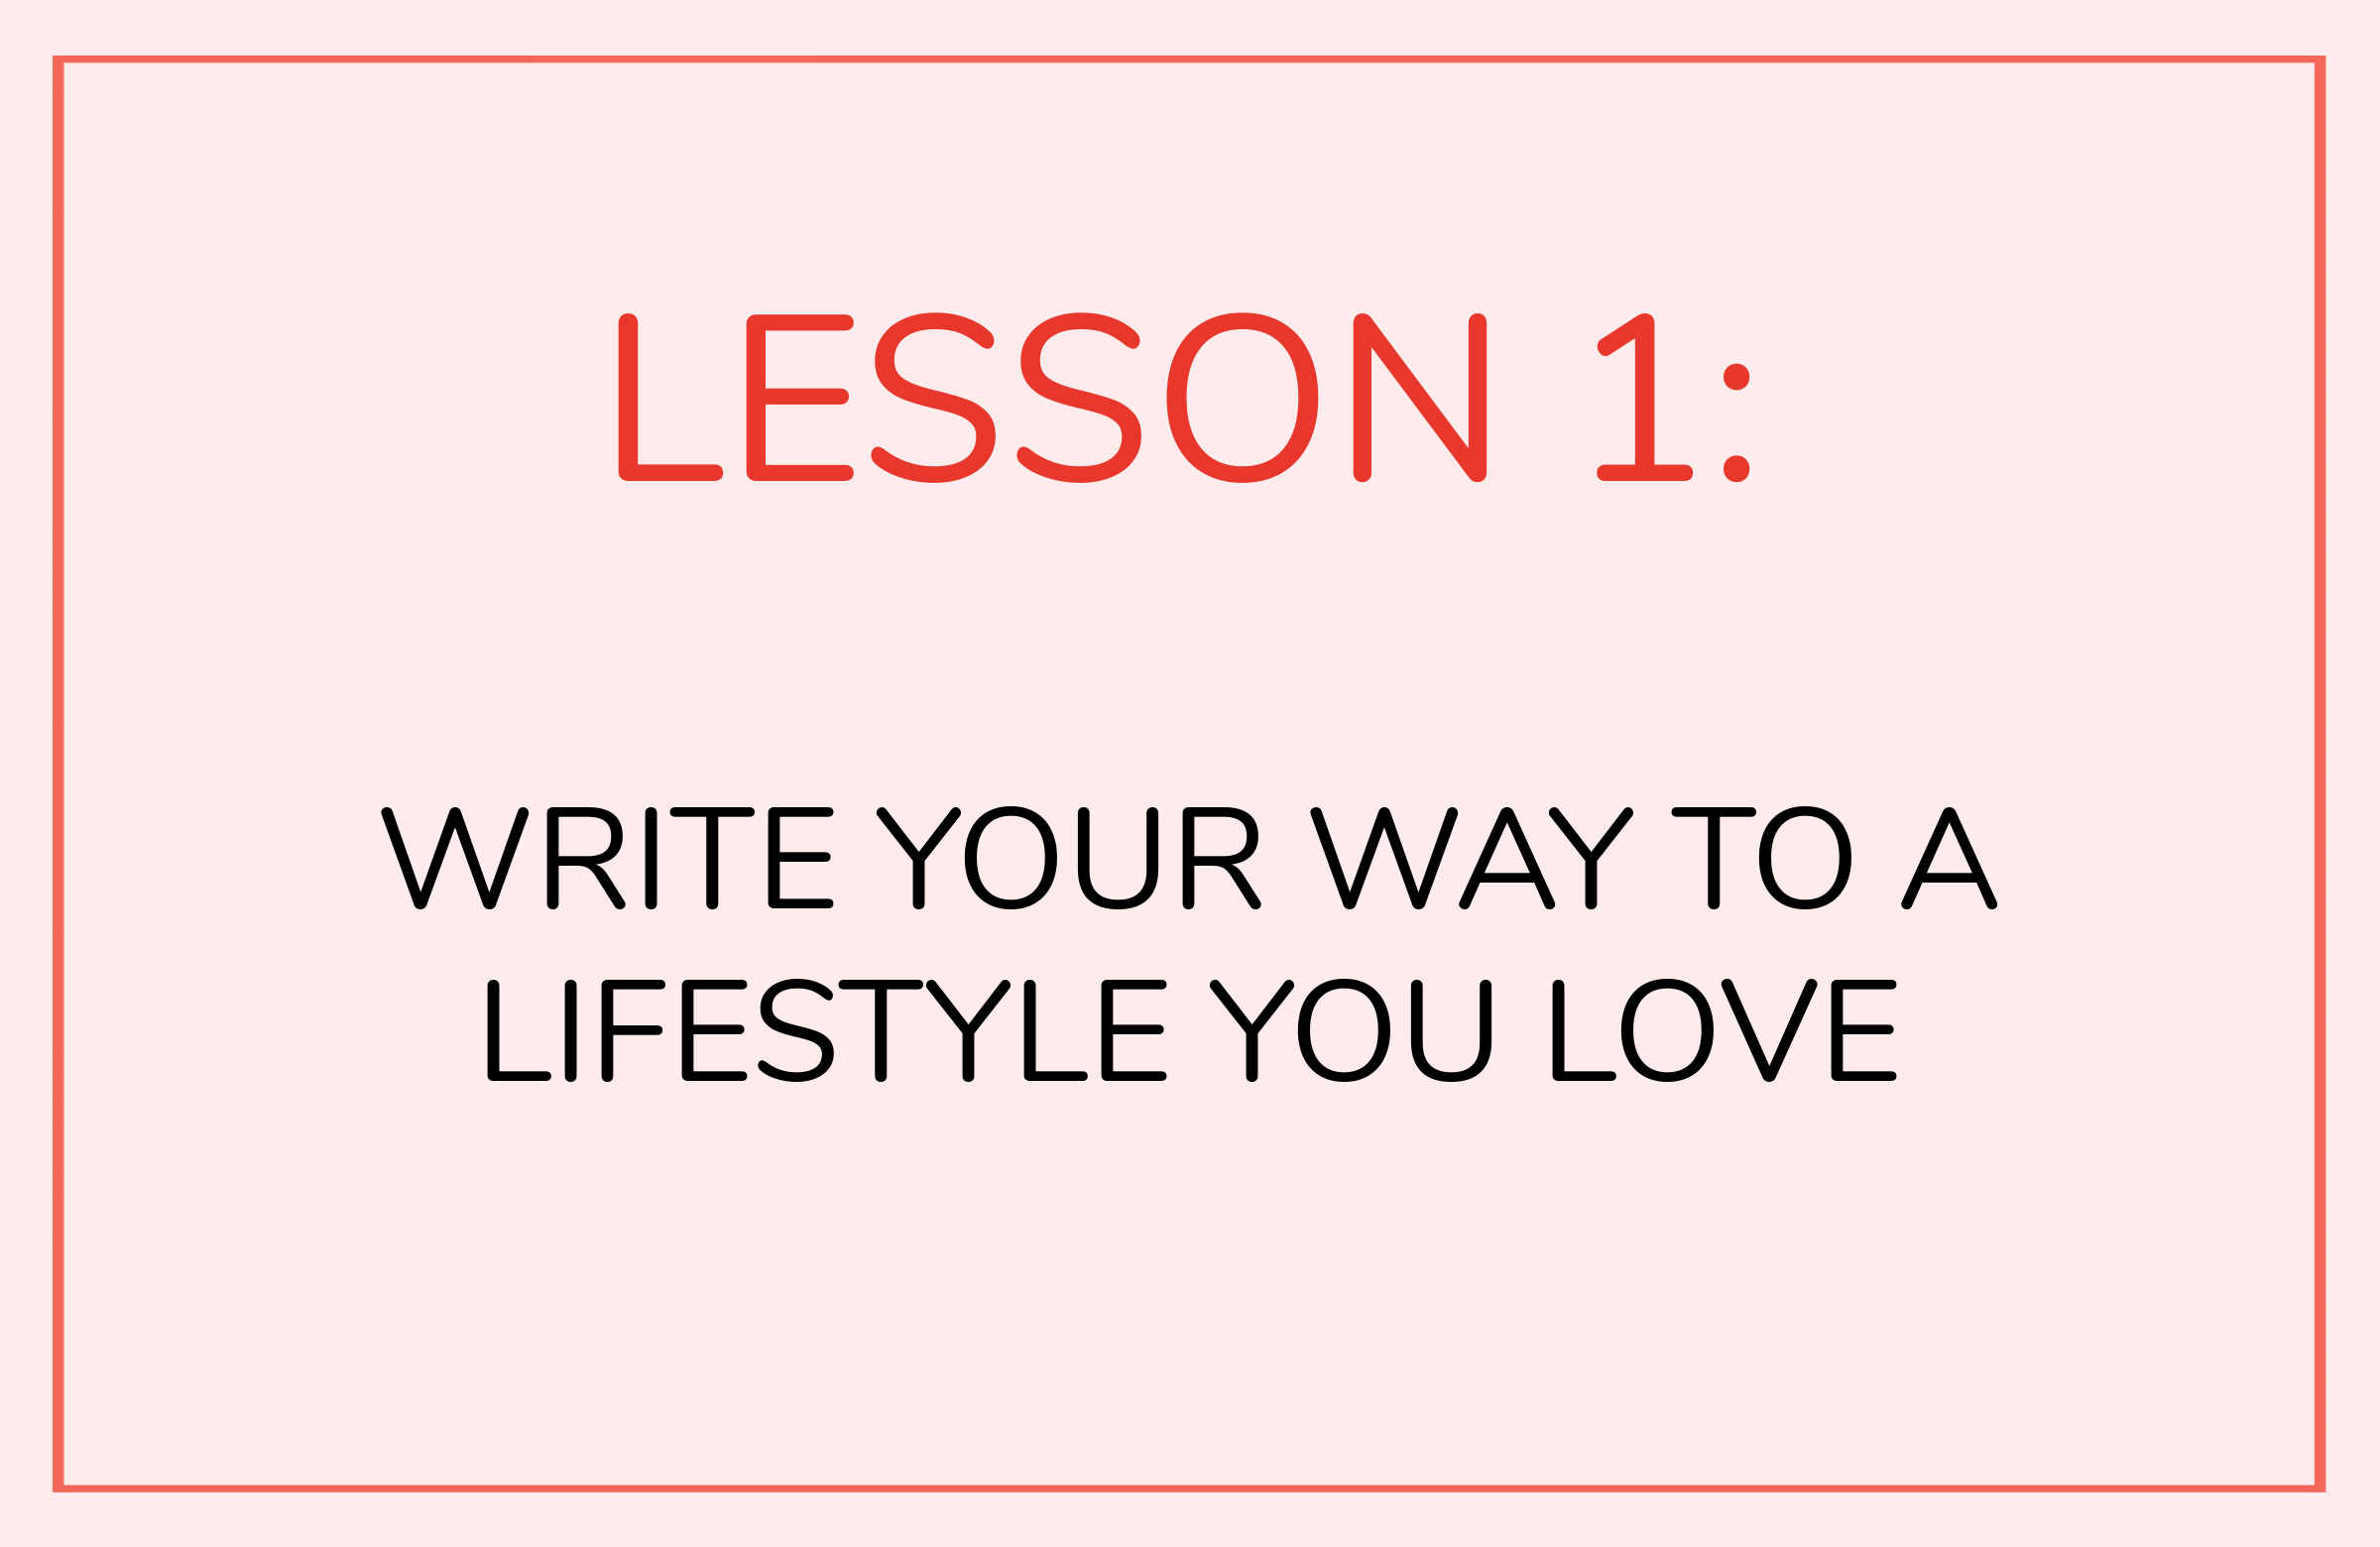 LESSON 1: Write your way to a lifestyle you love